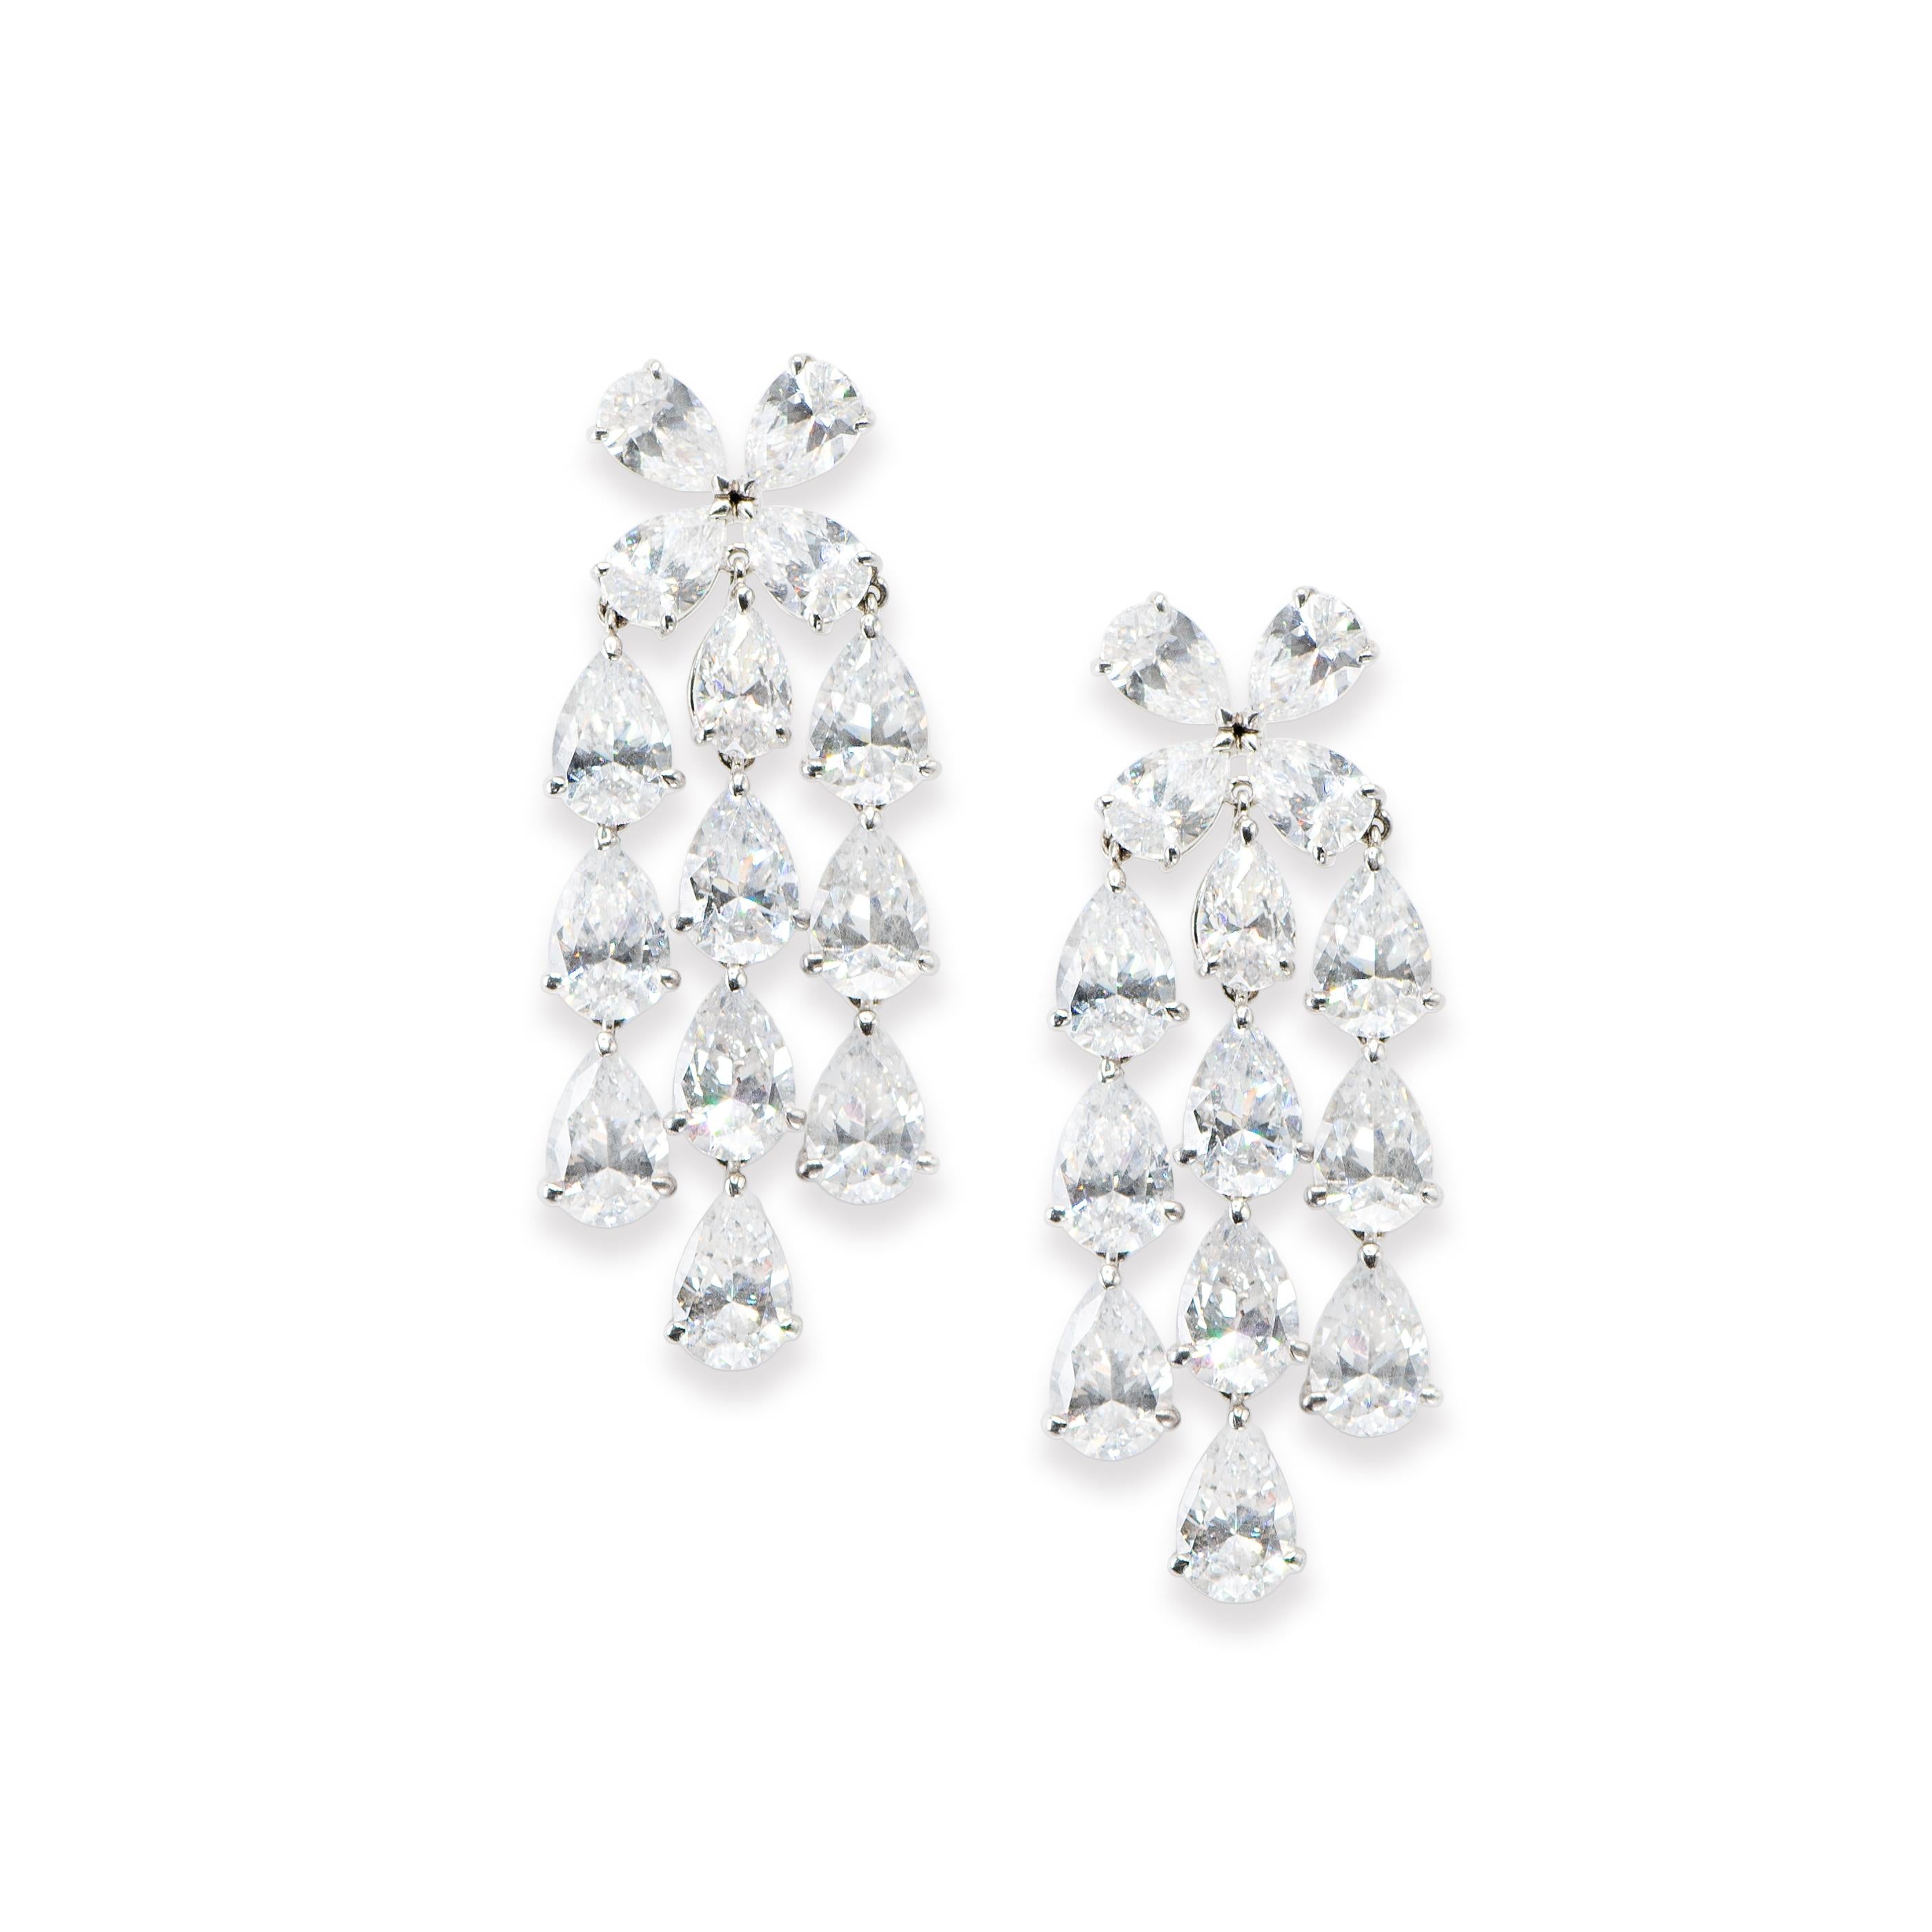 Pear Shaped Diamond Earring.

Each Stone is certified as DEF Color and VS-SI Clarity. Set in 18 Karat White Gold.

